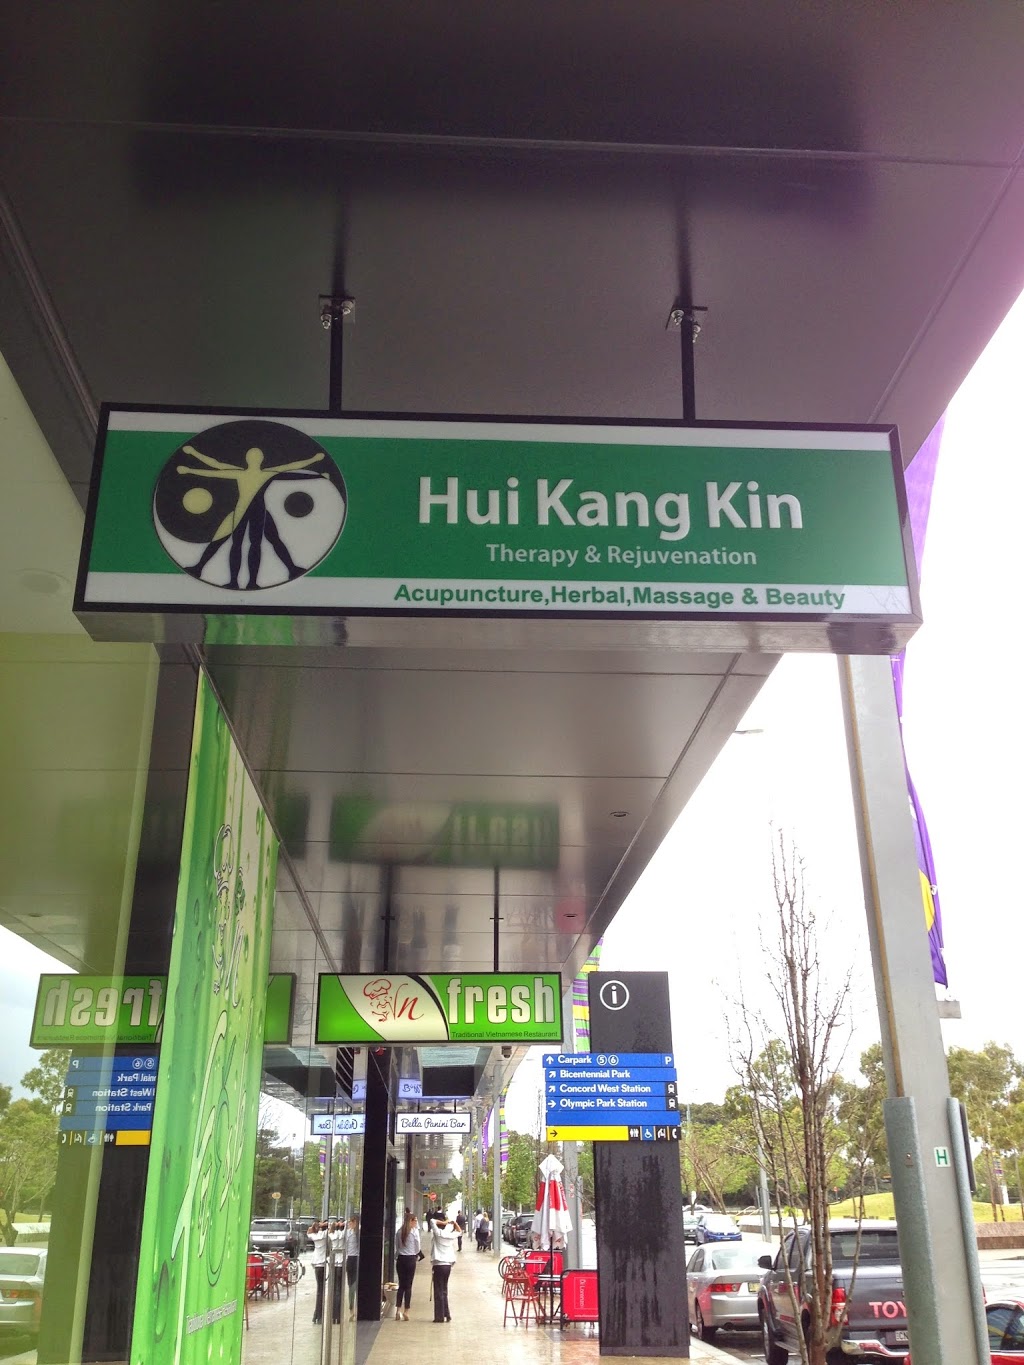 Hui Kang Kin Therapy & Rejuvenation Clinic | health | P7 parking. Hockey Pitch 2, Eastern Grandstand Room 2 Olympic Boulevard Located in Quay Centre, Sydney Olympic Park NSW 2127, Australia | 0431623109 OR +61431623109